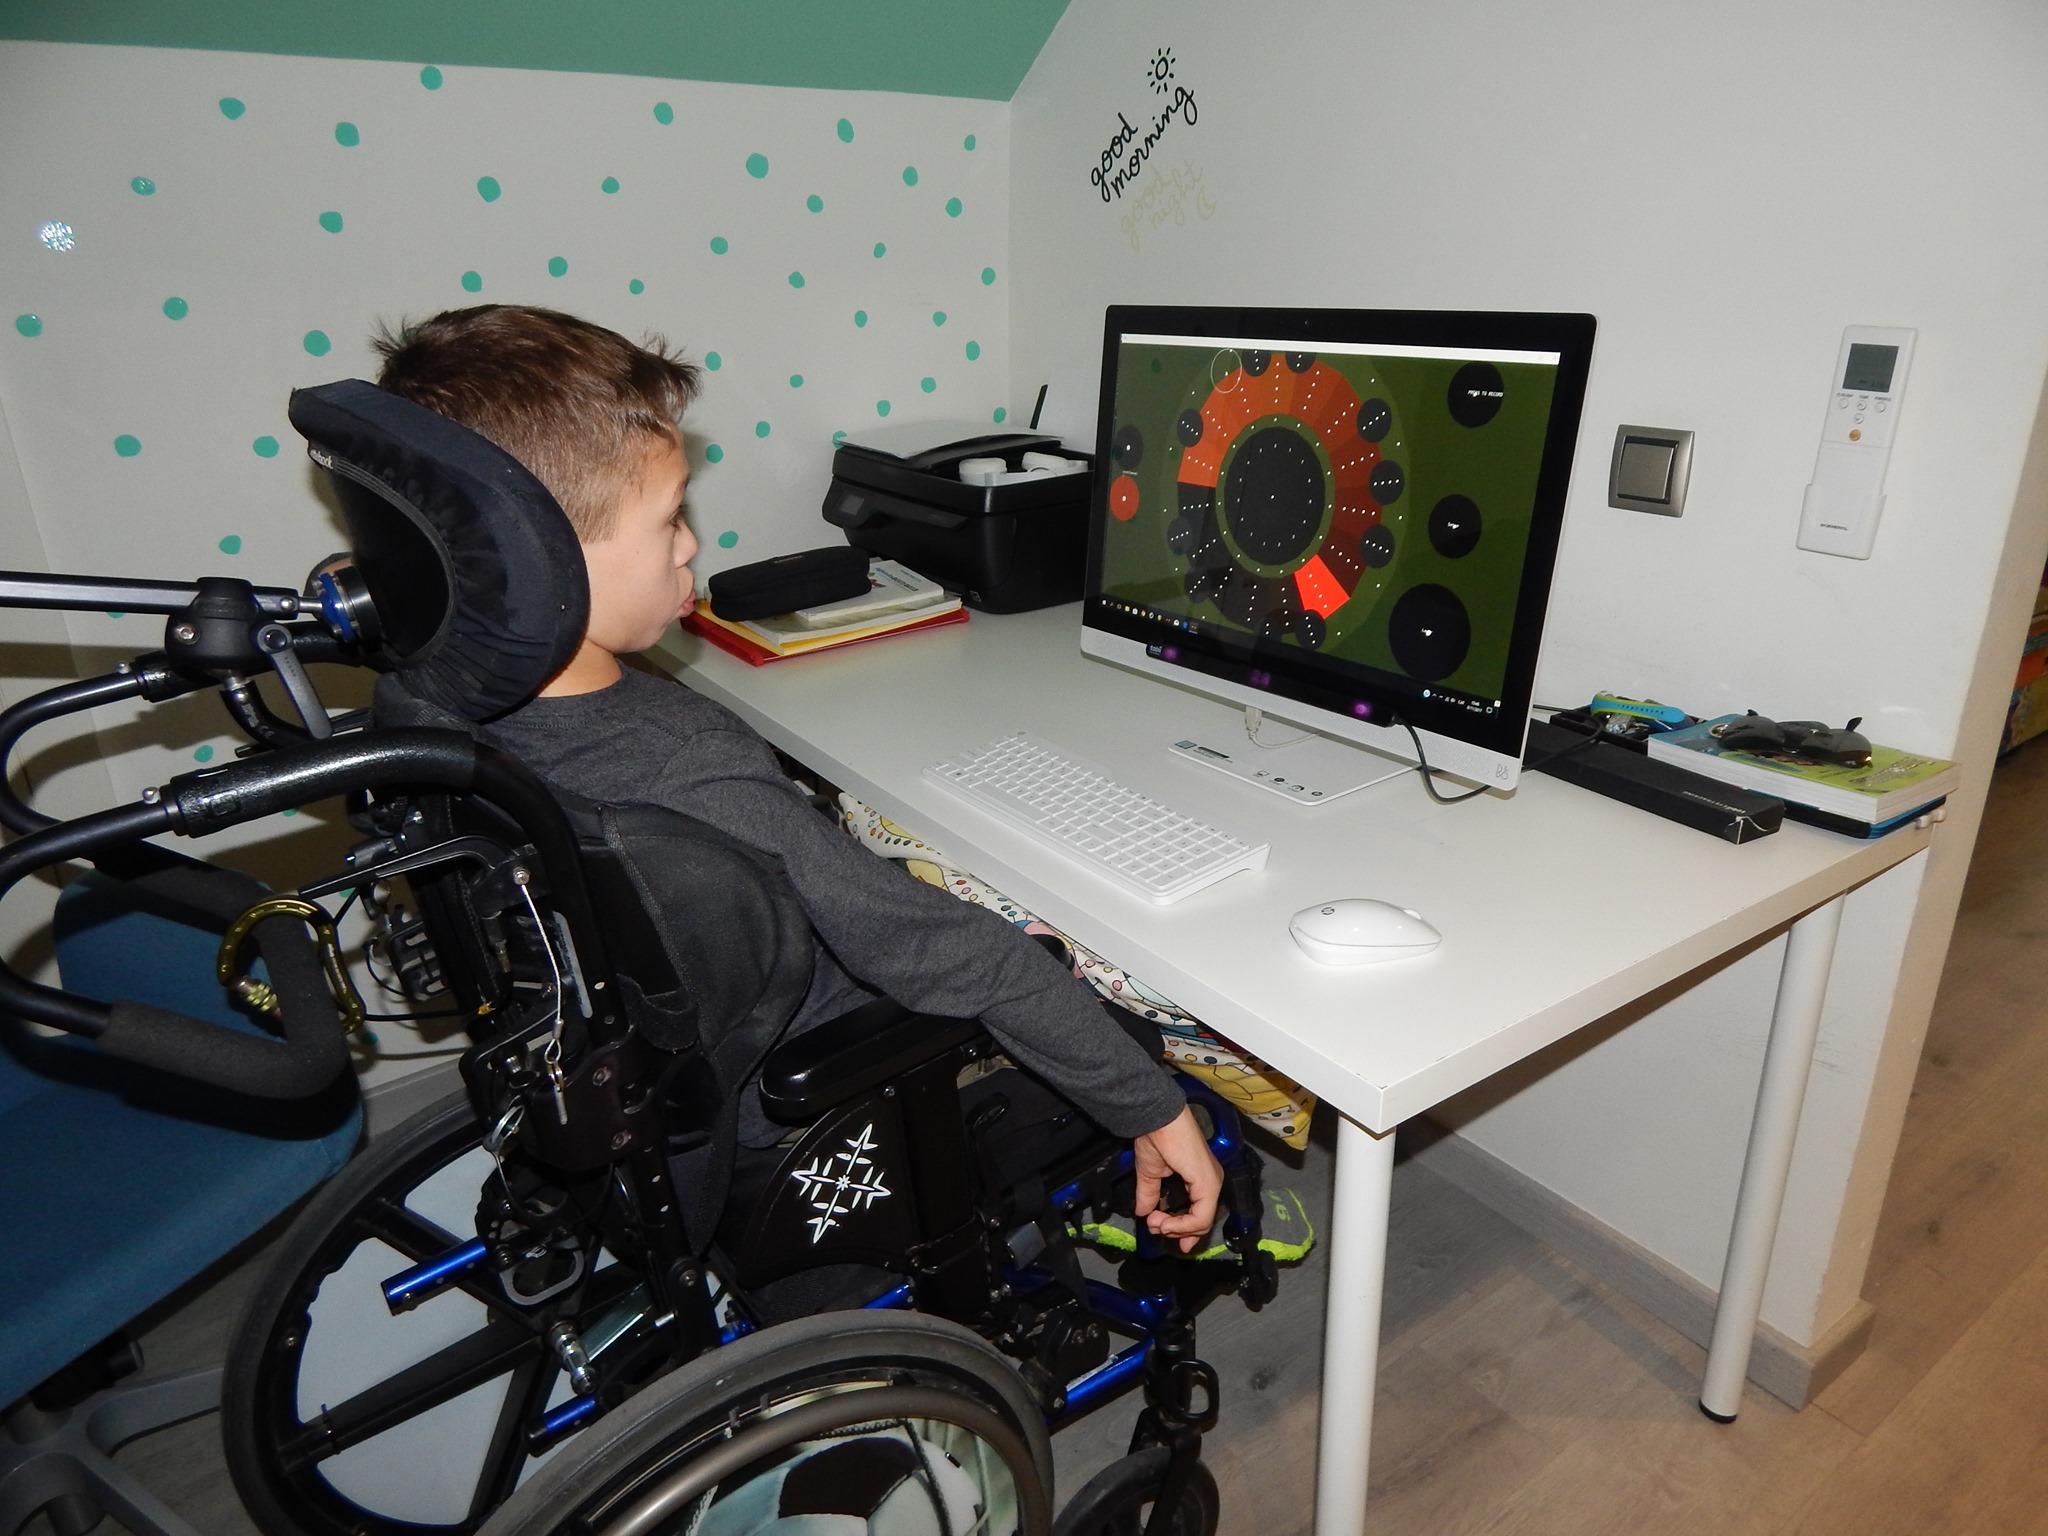 It’s set up to accommodate those suffering from cerebral palsy, amyotrophic lateral sclerosis, muscular dystrophy, amputation of an upper limb, or spinal cord injury by letting them use their eyes or head movements to control a colour wheel coded with chords to play music. To use the EyeHarp, musicians simply have to install the software and an eye-tracking camera.